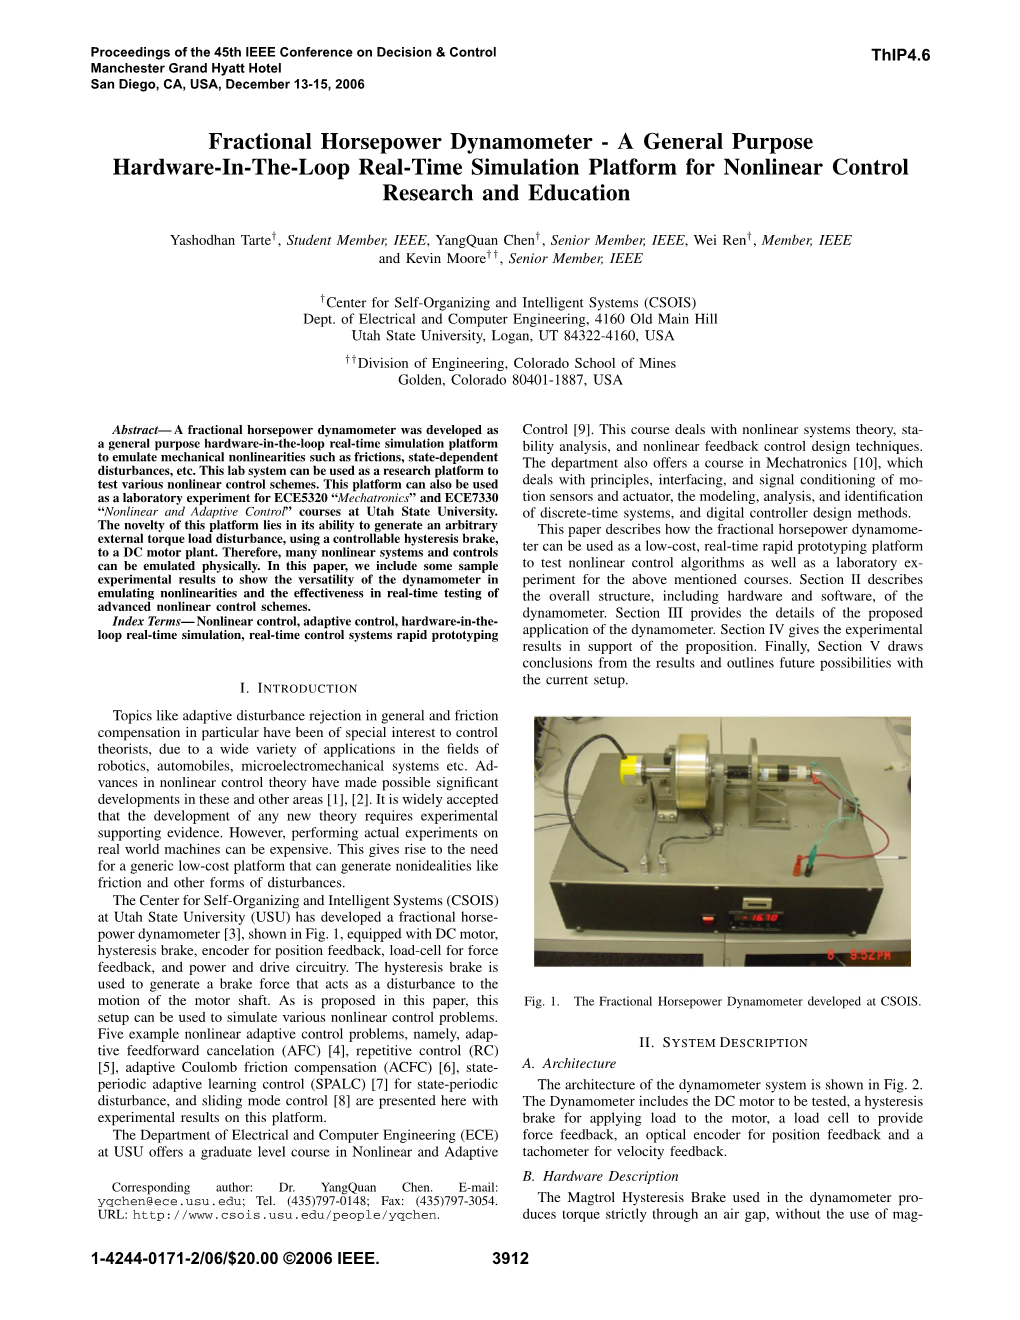 Fractional Horsepower Dynamometer - a General Purpose Hardware-In-The-Loop Real-Time Simulation Platform for Nonlinear Control Research and Education